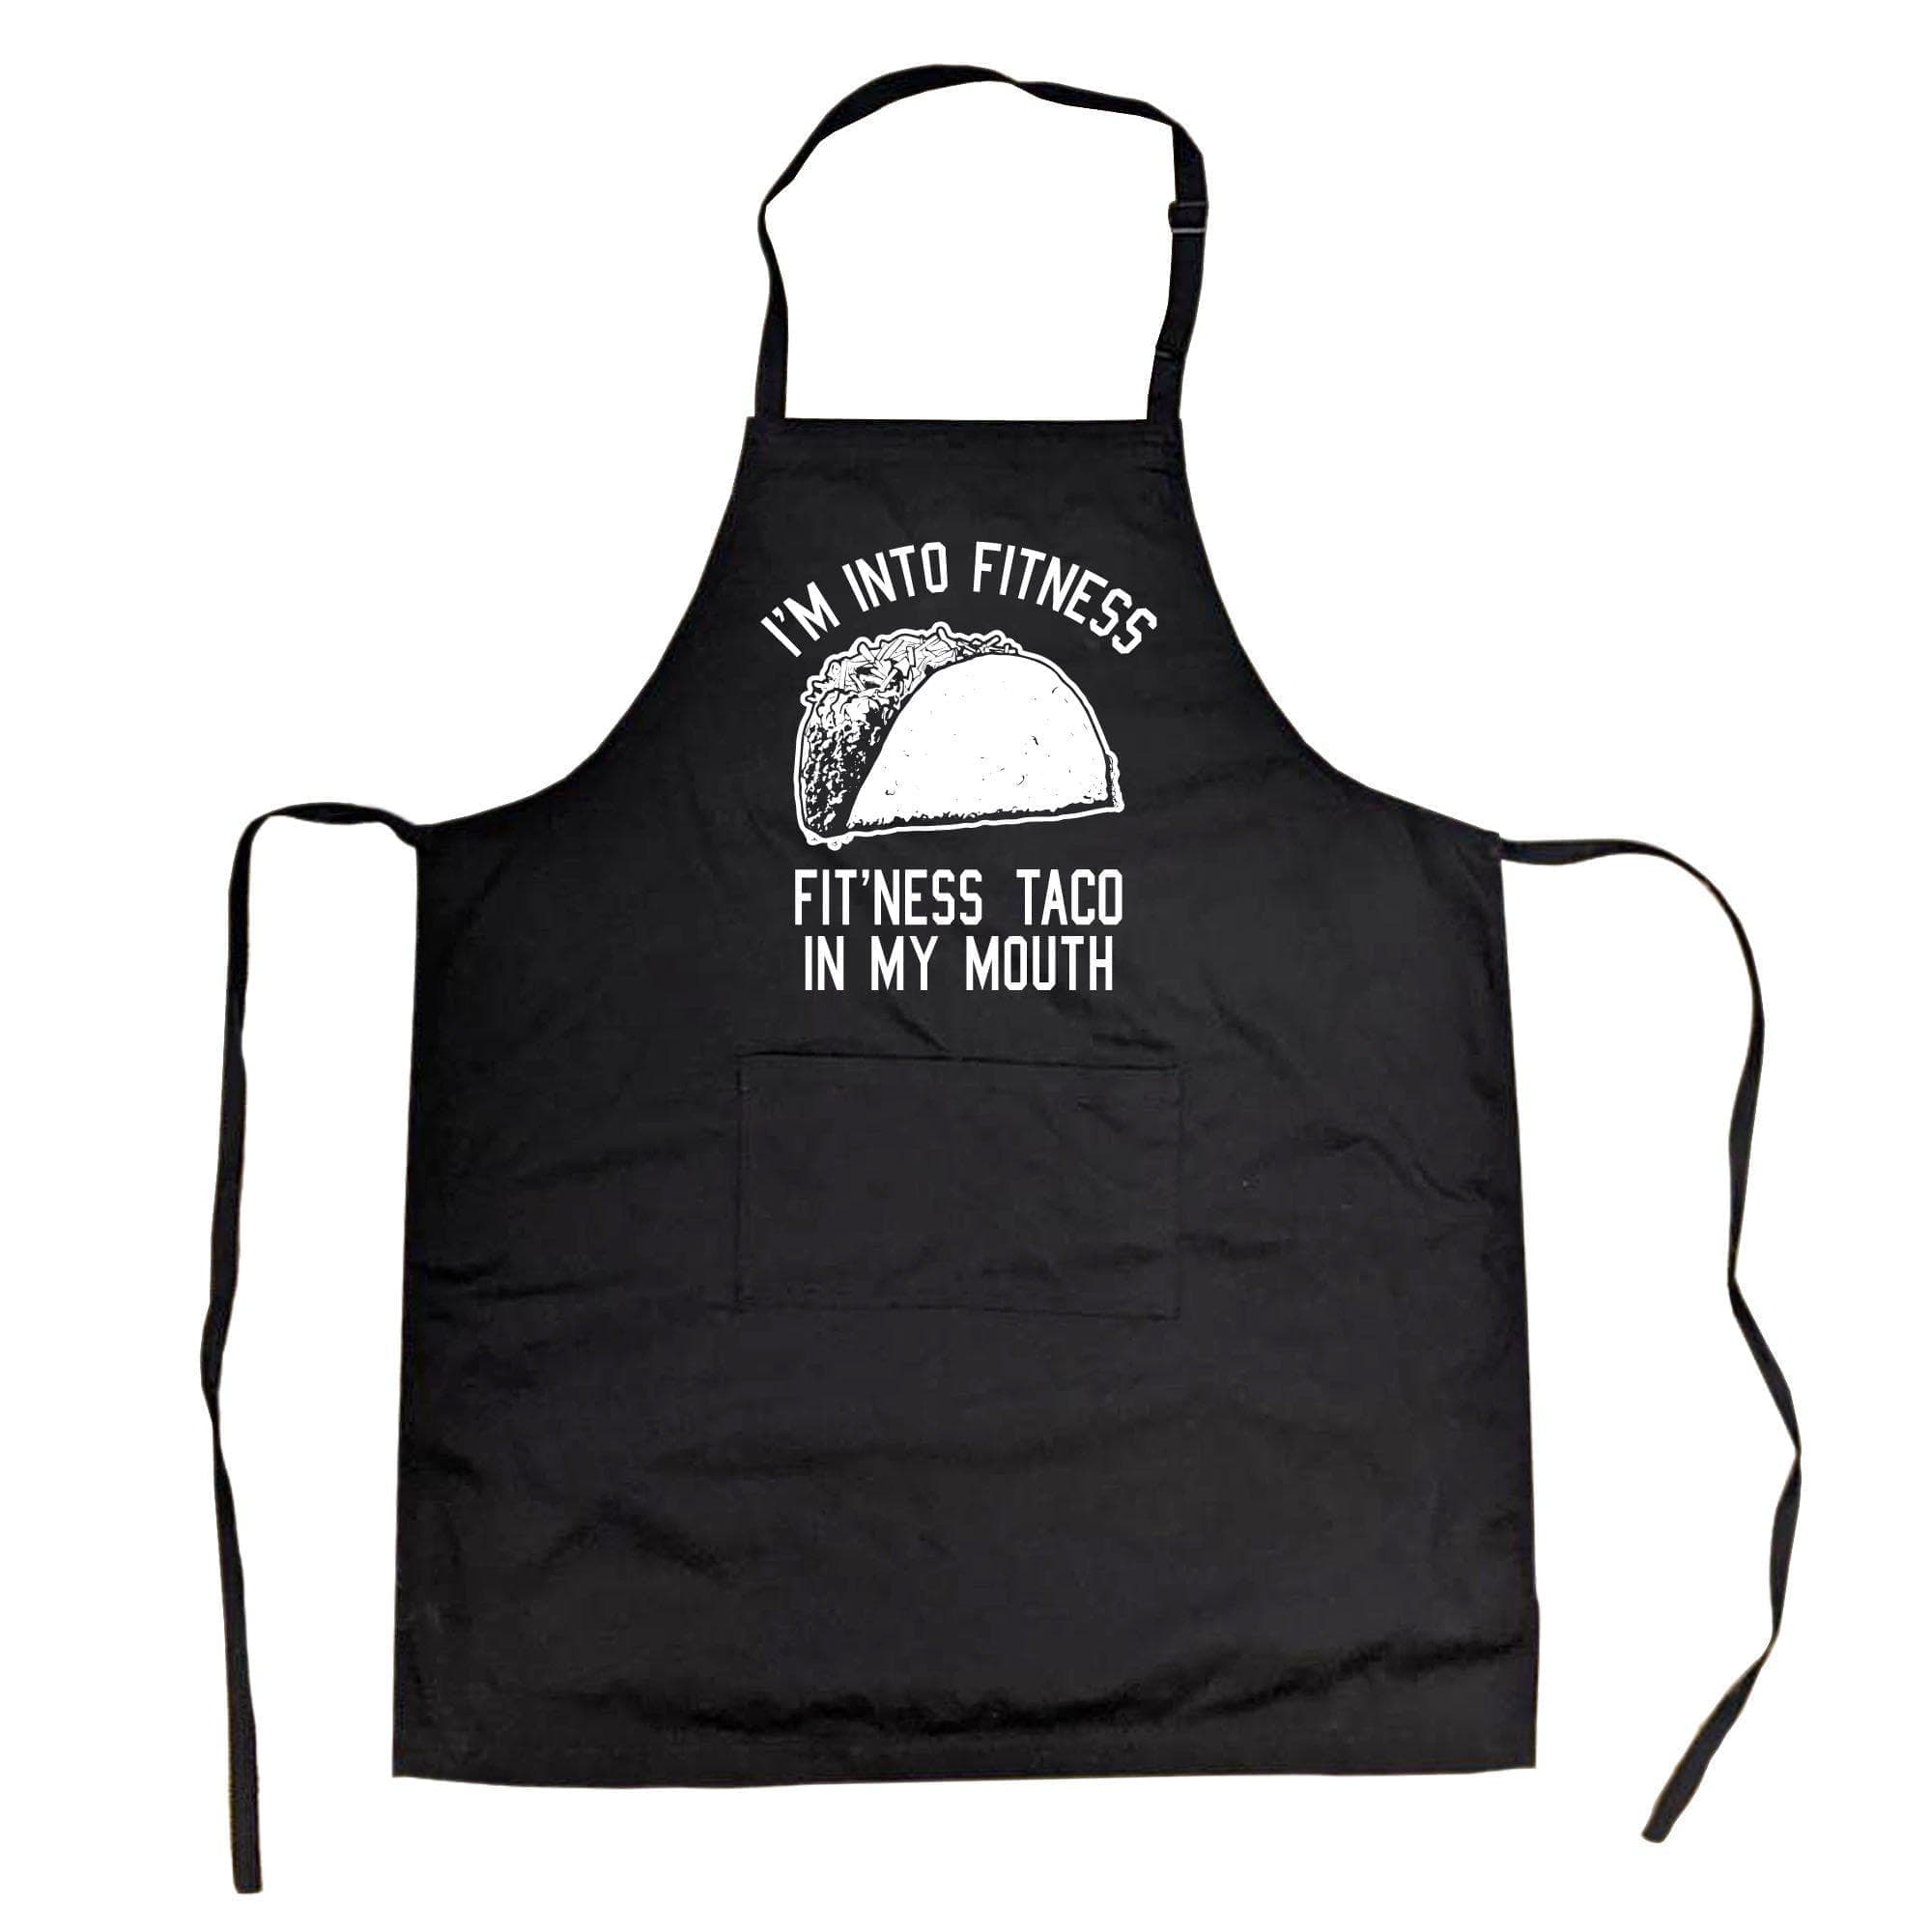 https://cdn.shopify.com/s/files/1/2959/1448/products/crazy-dog-t-shirts-aprons-fitness-taco-cookout-apron-28215175413875_2000x.jpg?v=1624682715